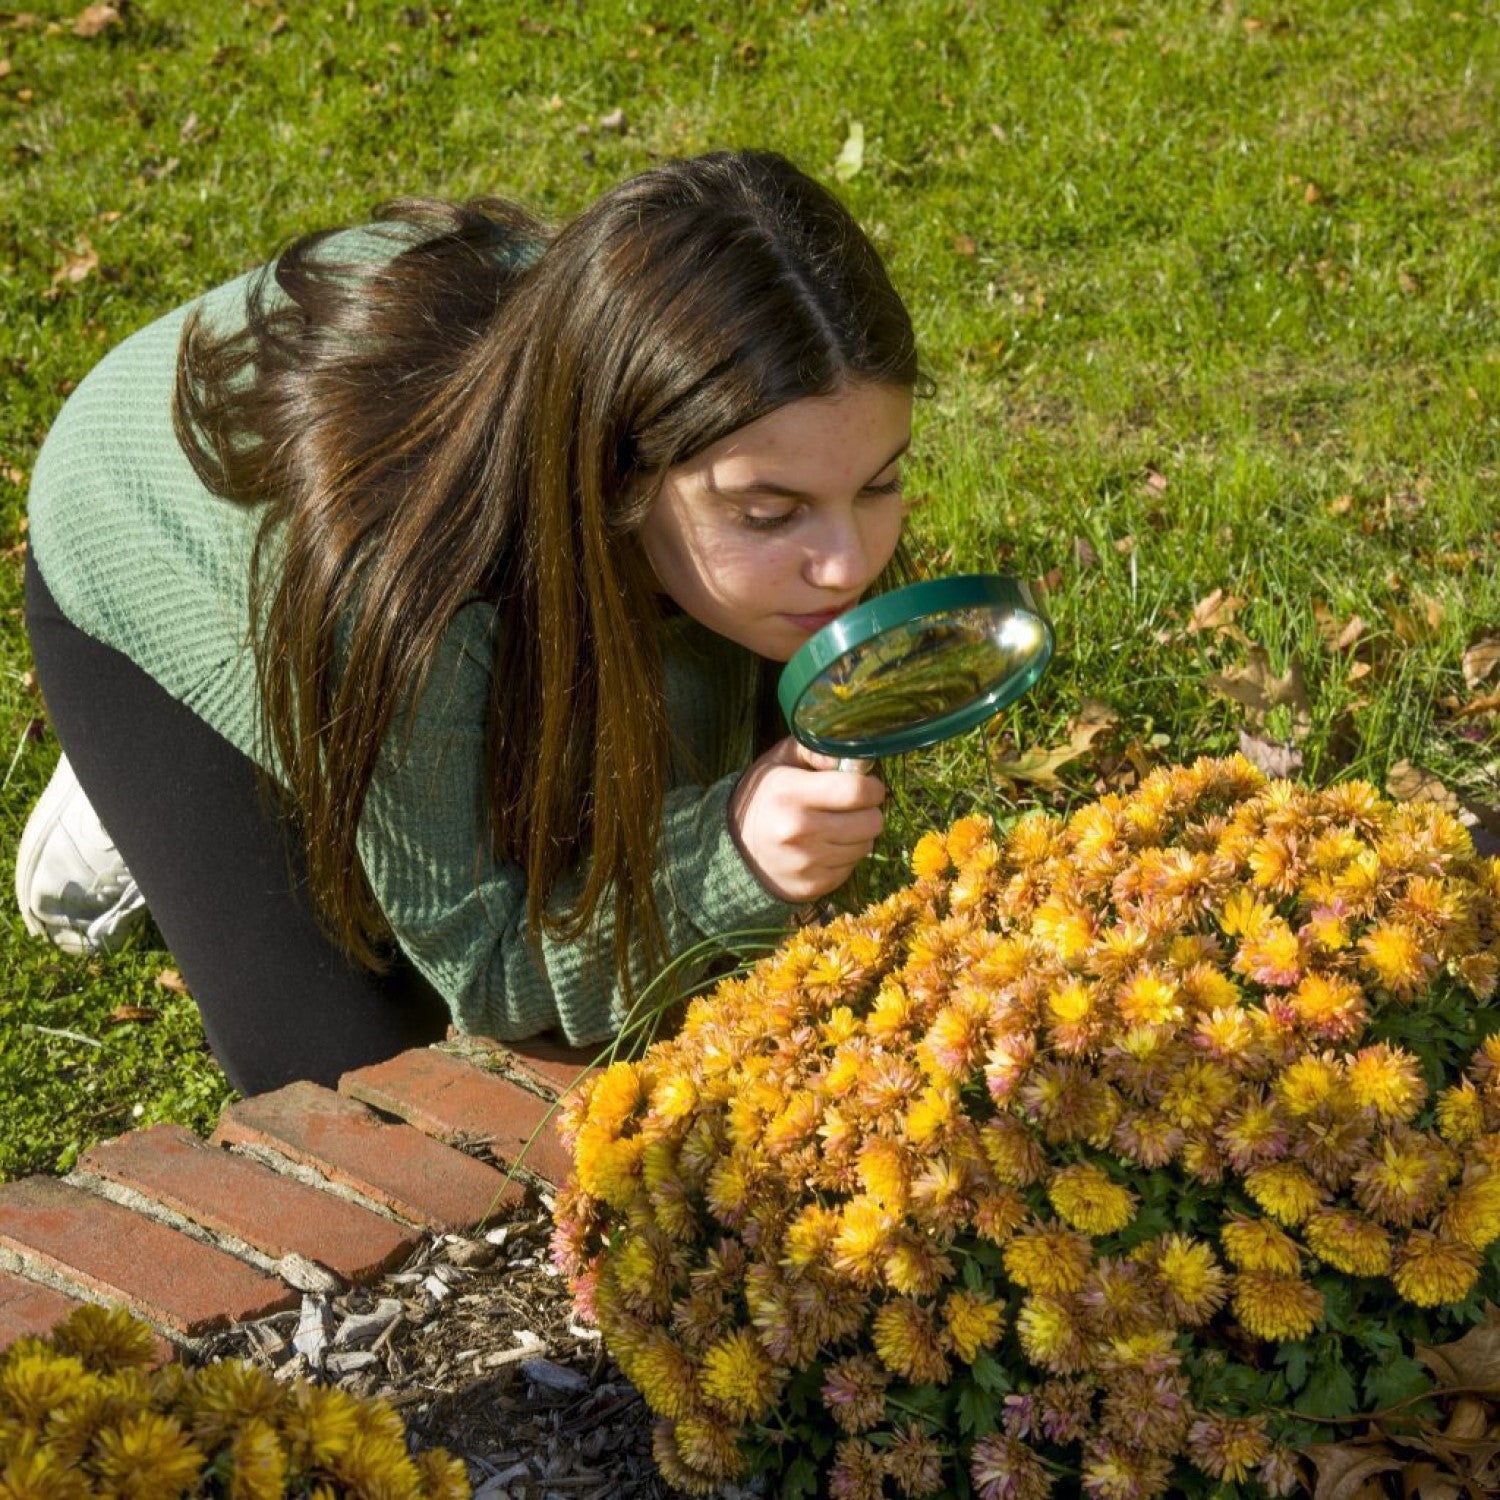 Image of a person looking at flowers through the magnifier.